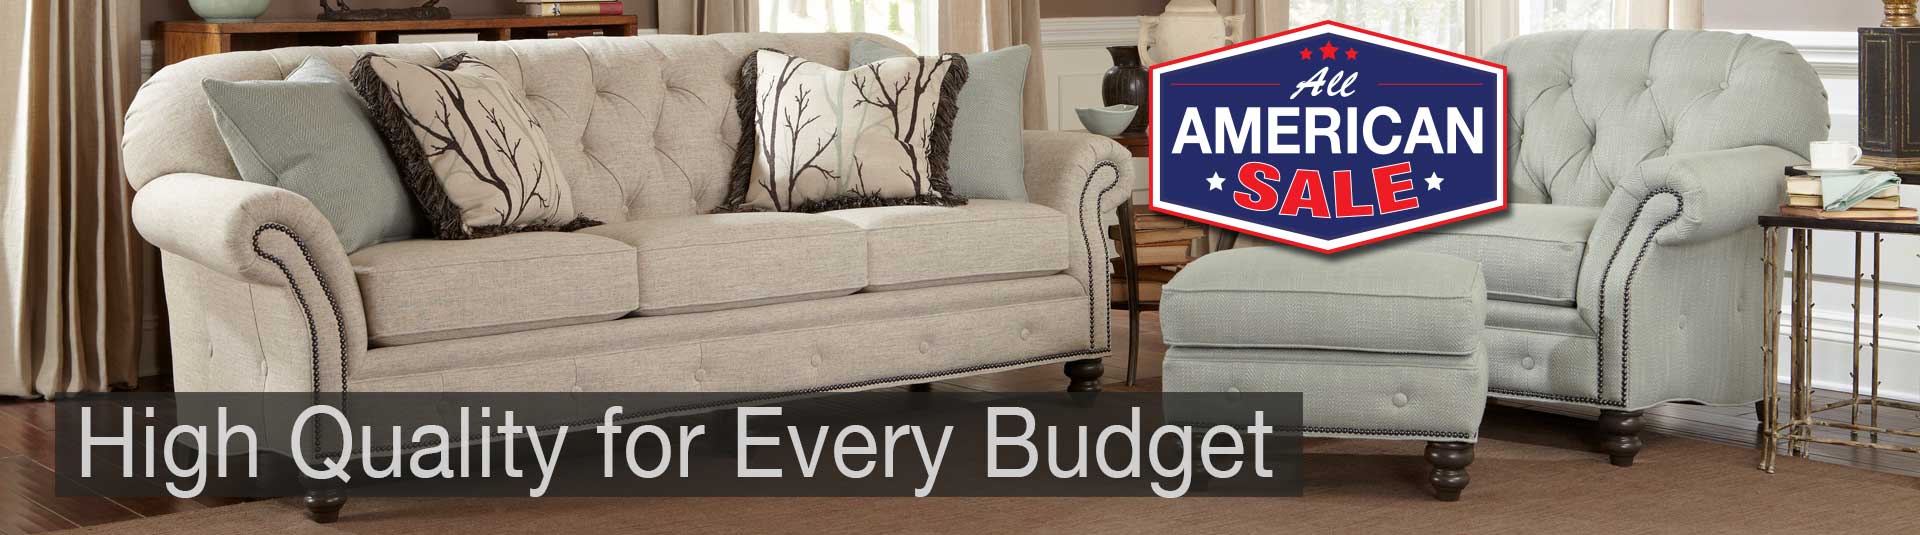 40% Off All Smith Brothers Upholstery Furniture during the All American Sale at Benson Stone Company!